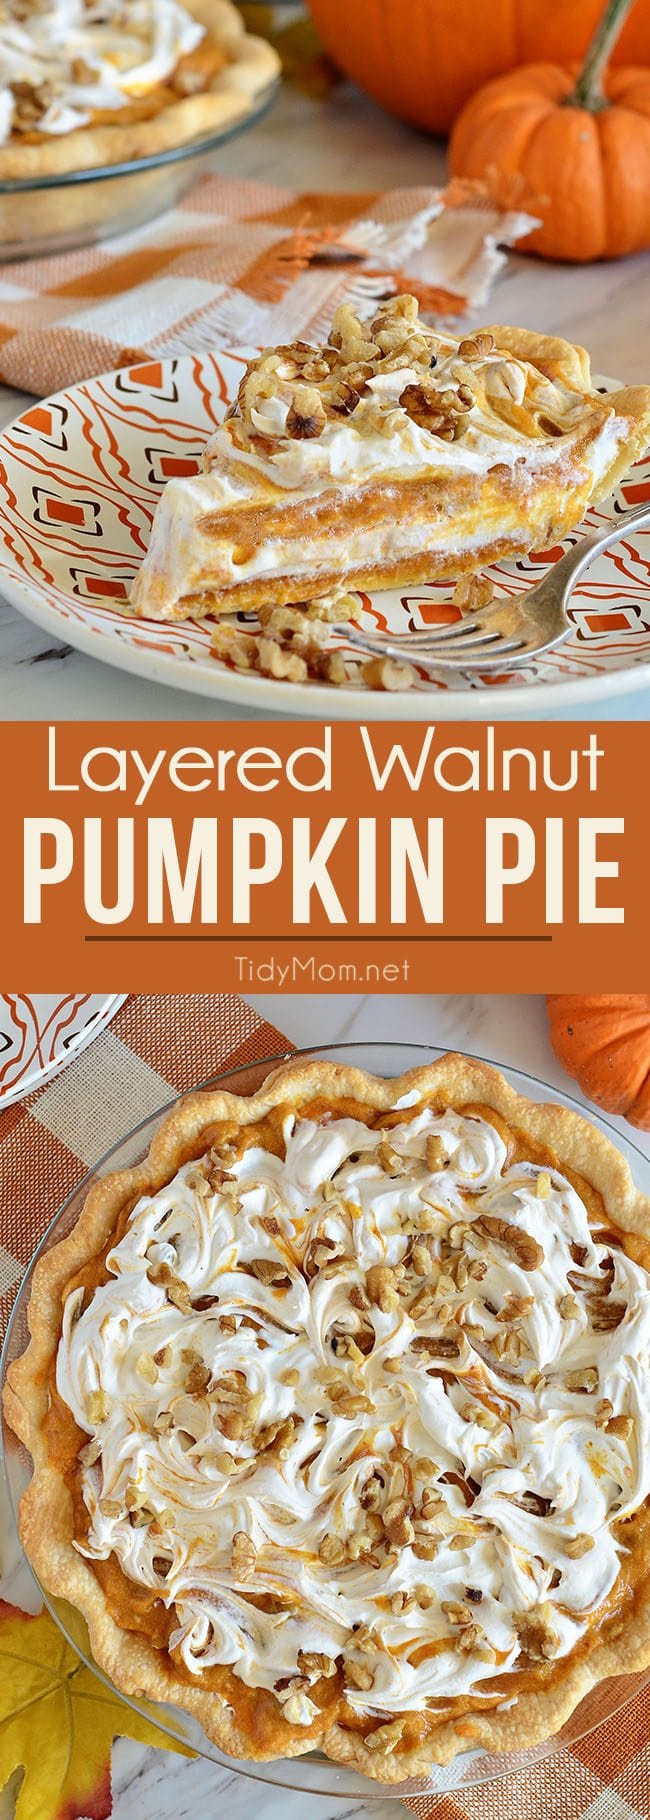 LAYERED WALNUT PUMPKIN PIE has been a long tradition in our family for Thanksgiving. This family favorite pumpkin pie recipe that was handed down to me by my grandpa 30+ years ago. This EASY recipe not your ordinary pumpkin pie, it’s a light and fluffy, scrumptious, cold creamy pumpkin pie! A perfect alternative to regular pumpkin pie for Thanksgiving or Christmas dessert. PRINT the recipe at Tidymom.net